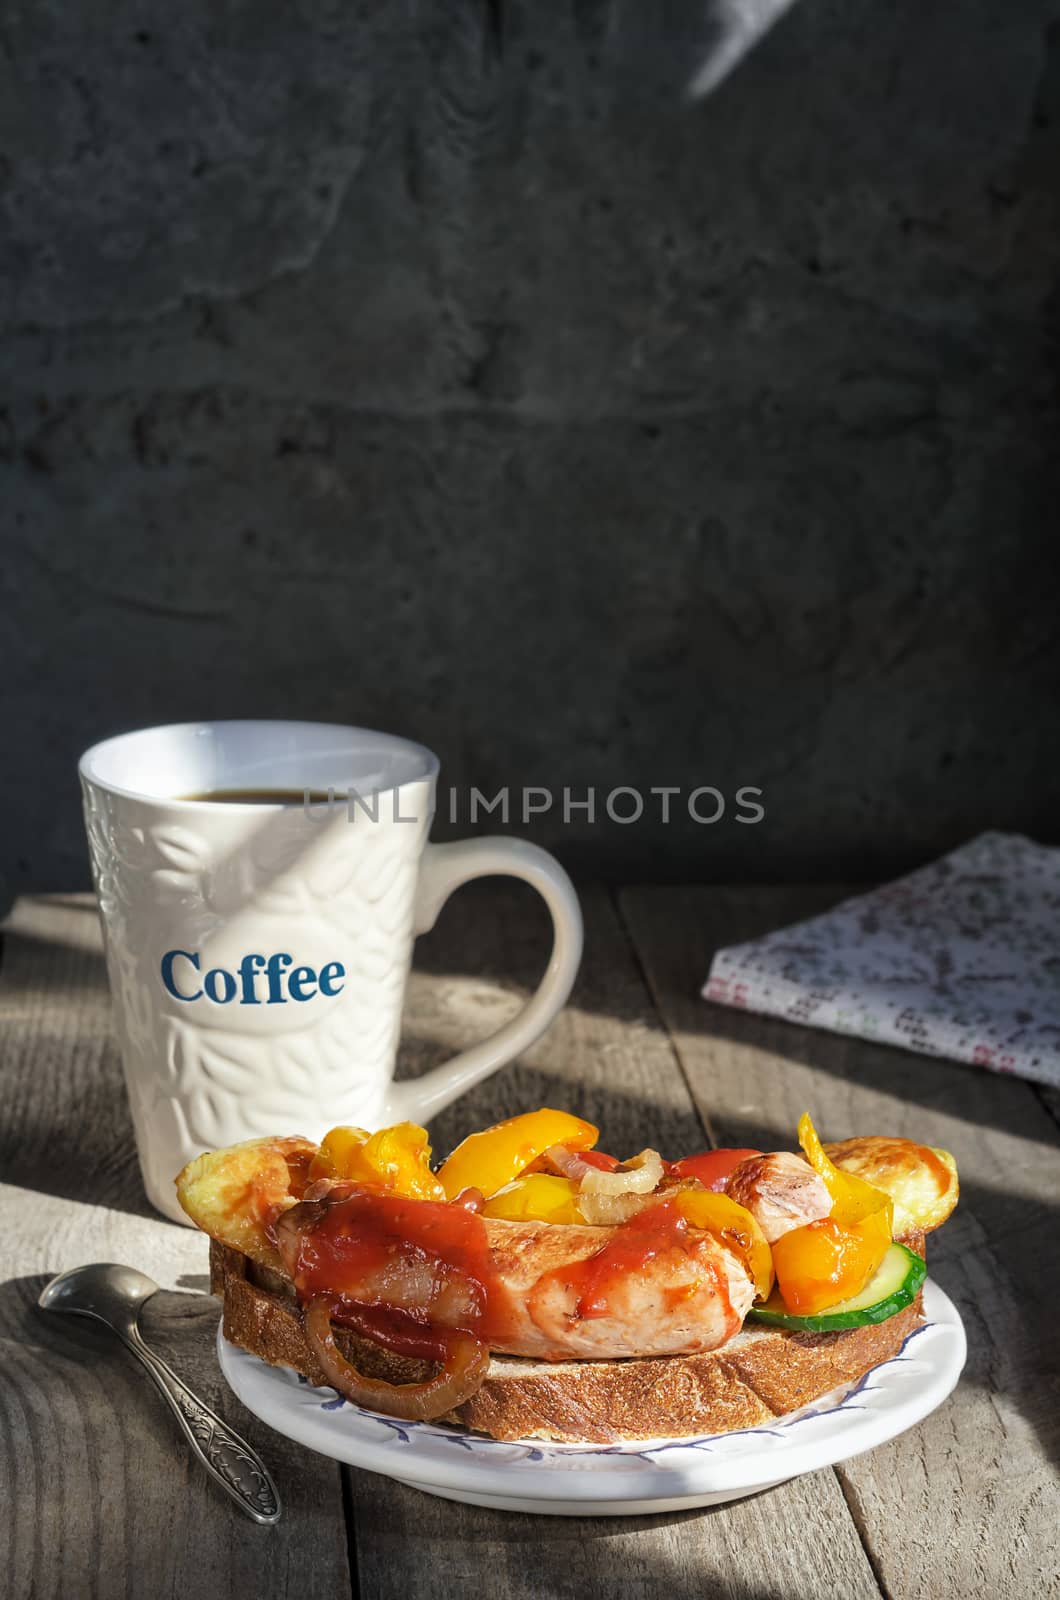 Sandwich with grilled sausages, on a plate and coffee mug with the inscription on the old wooden surface.